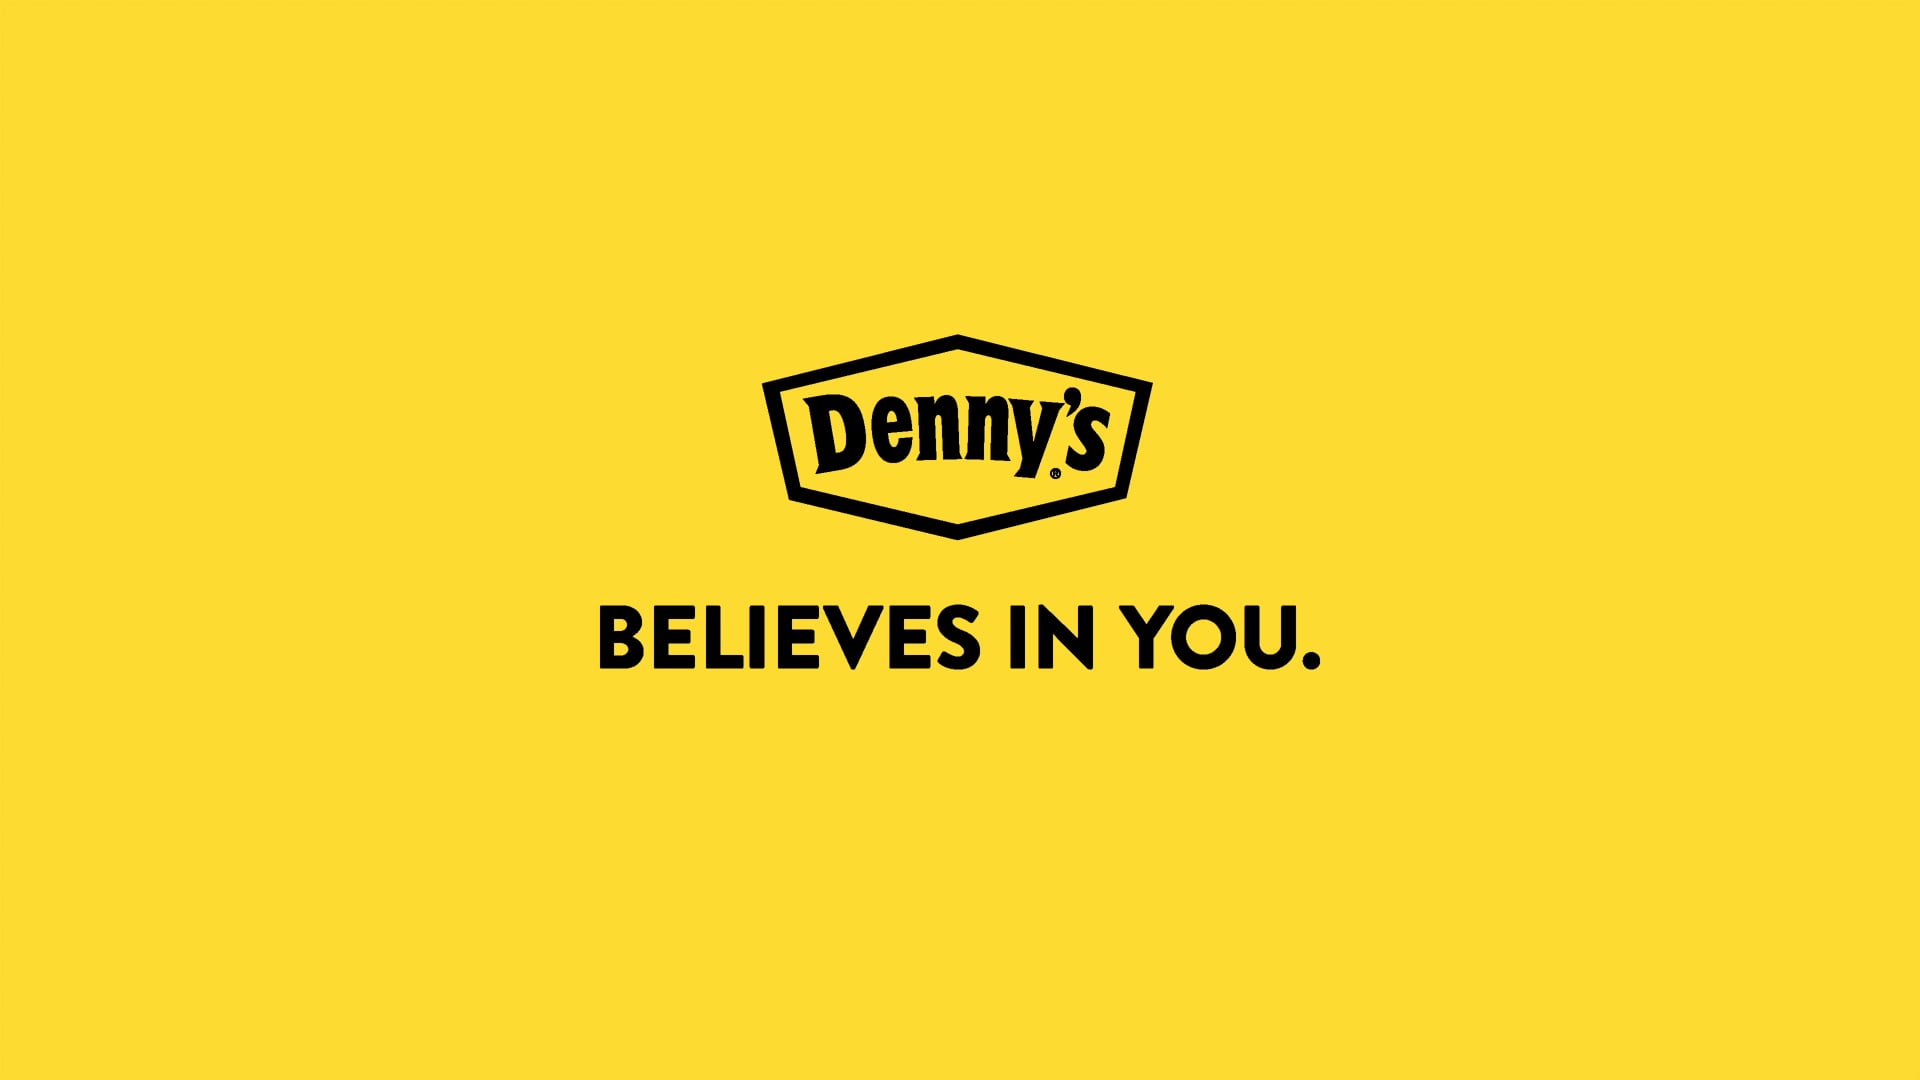 Denny's Believes In You